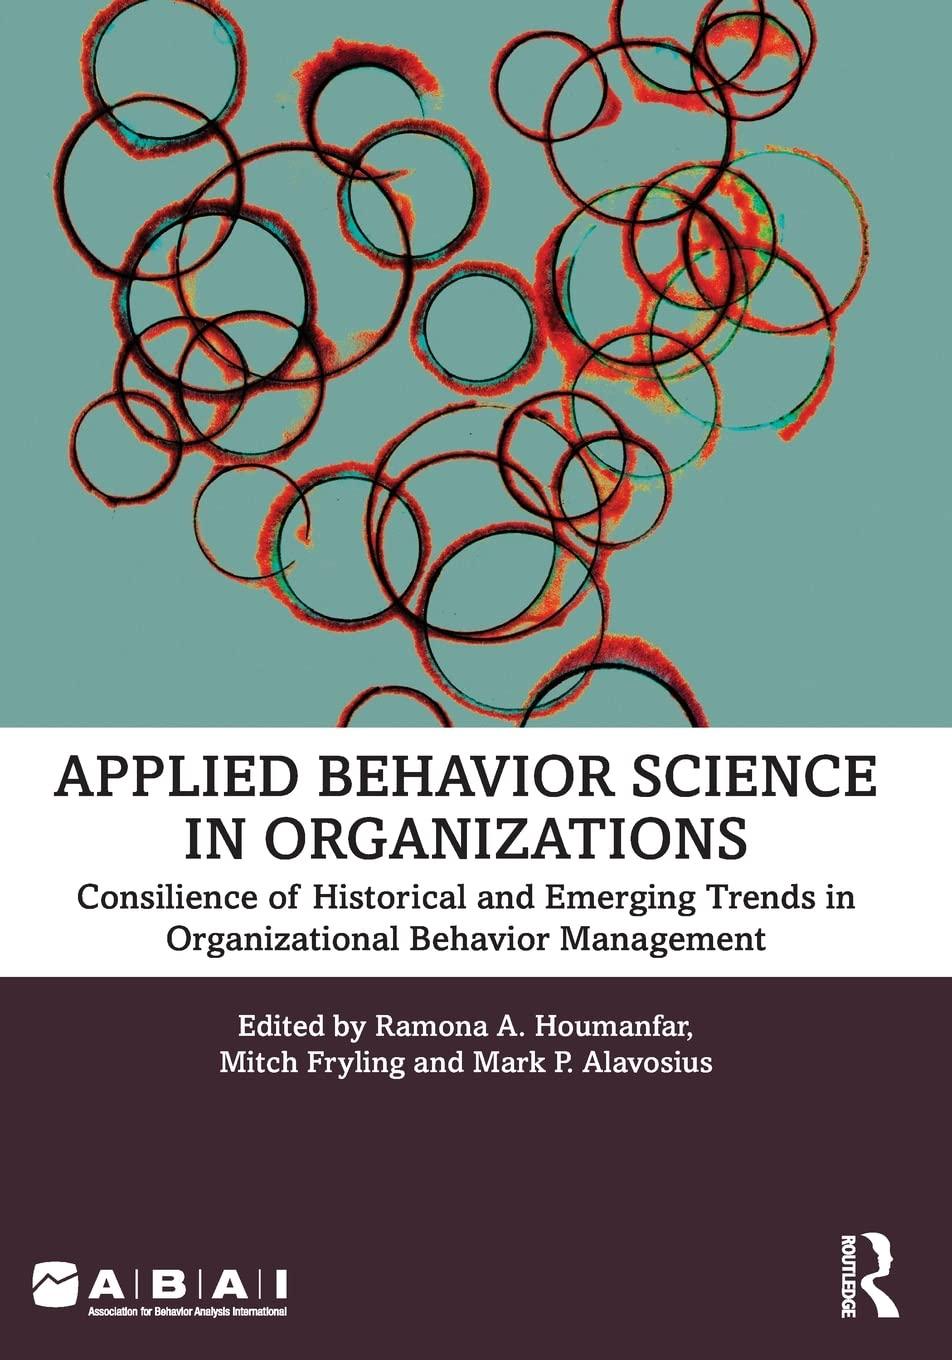 applied behavior science in organizations consilience of historical and emerging trends in organizational